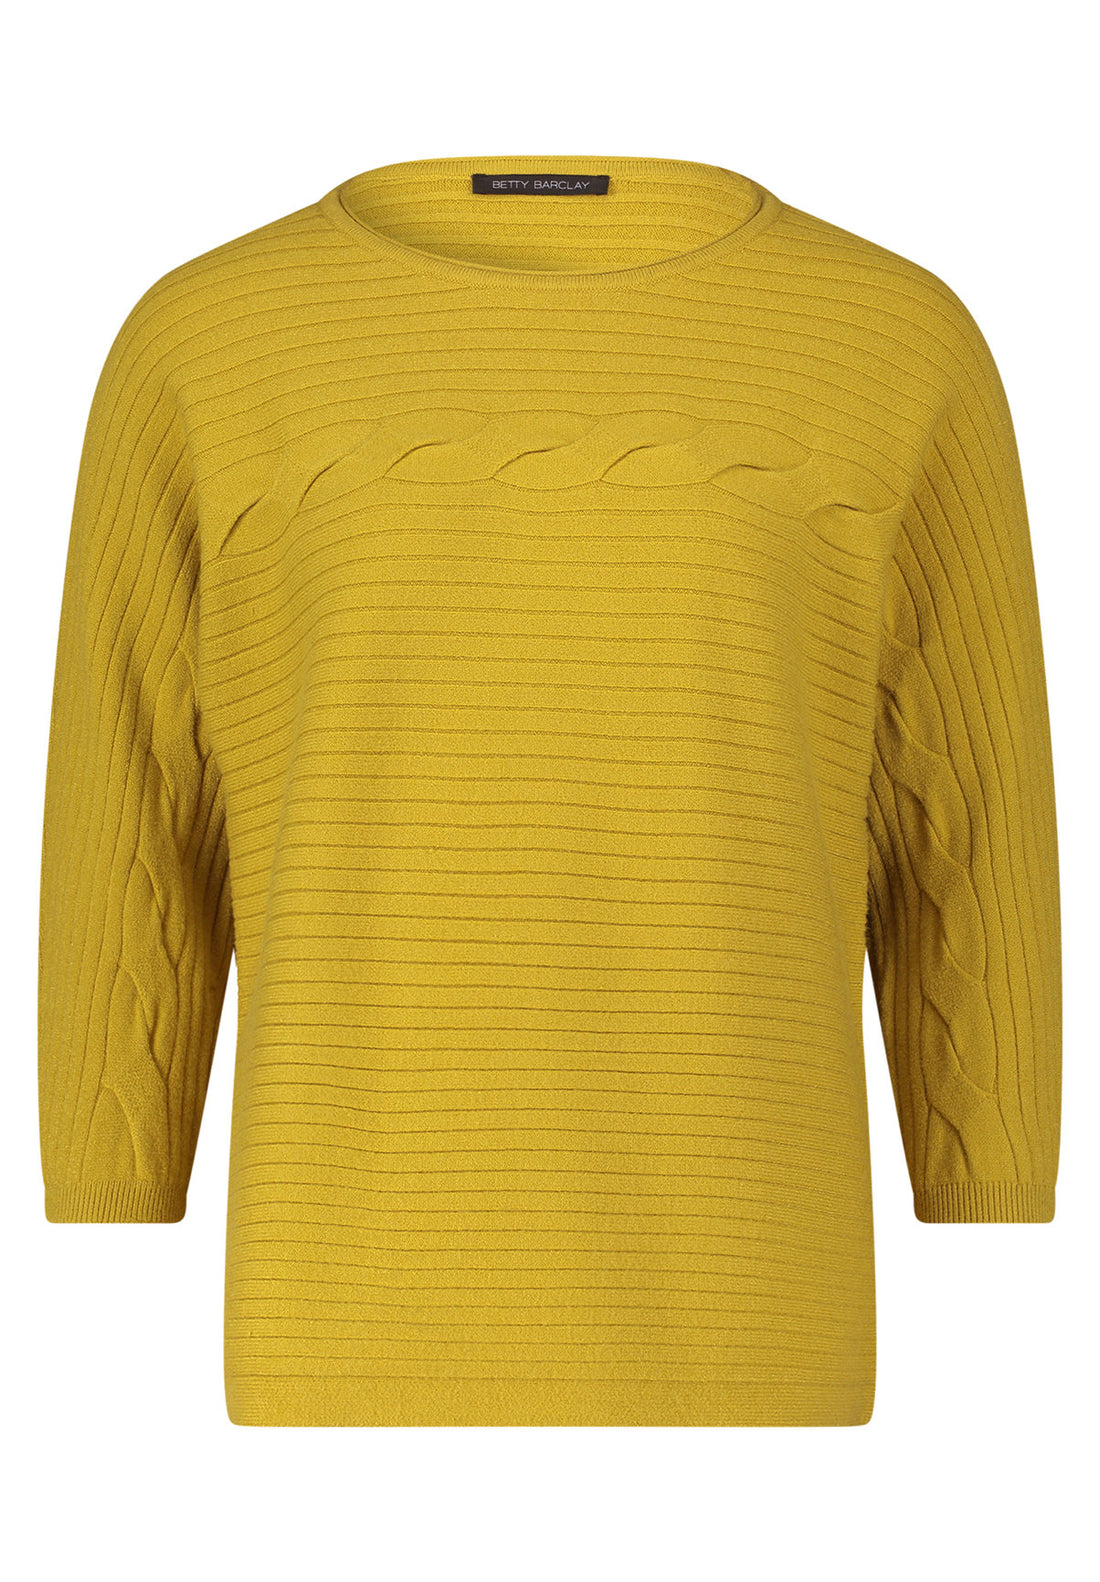 Yellow Pullover With Mockneck_5978-1026_5478_01